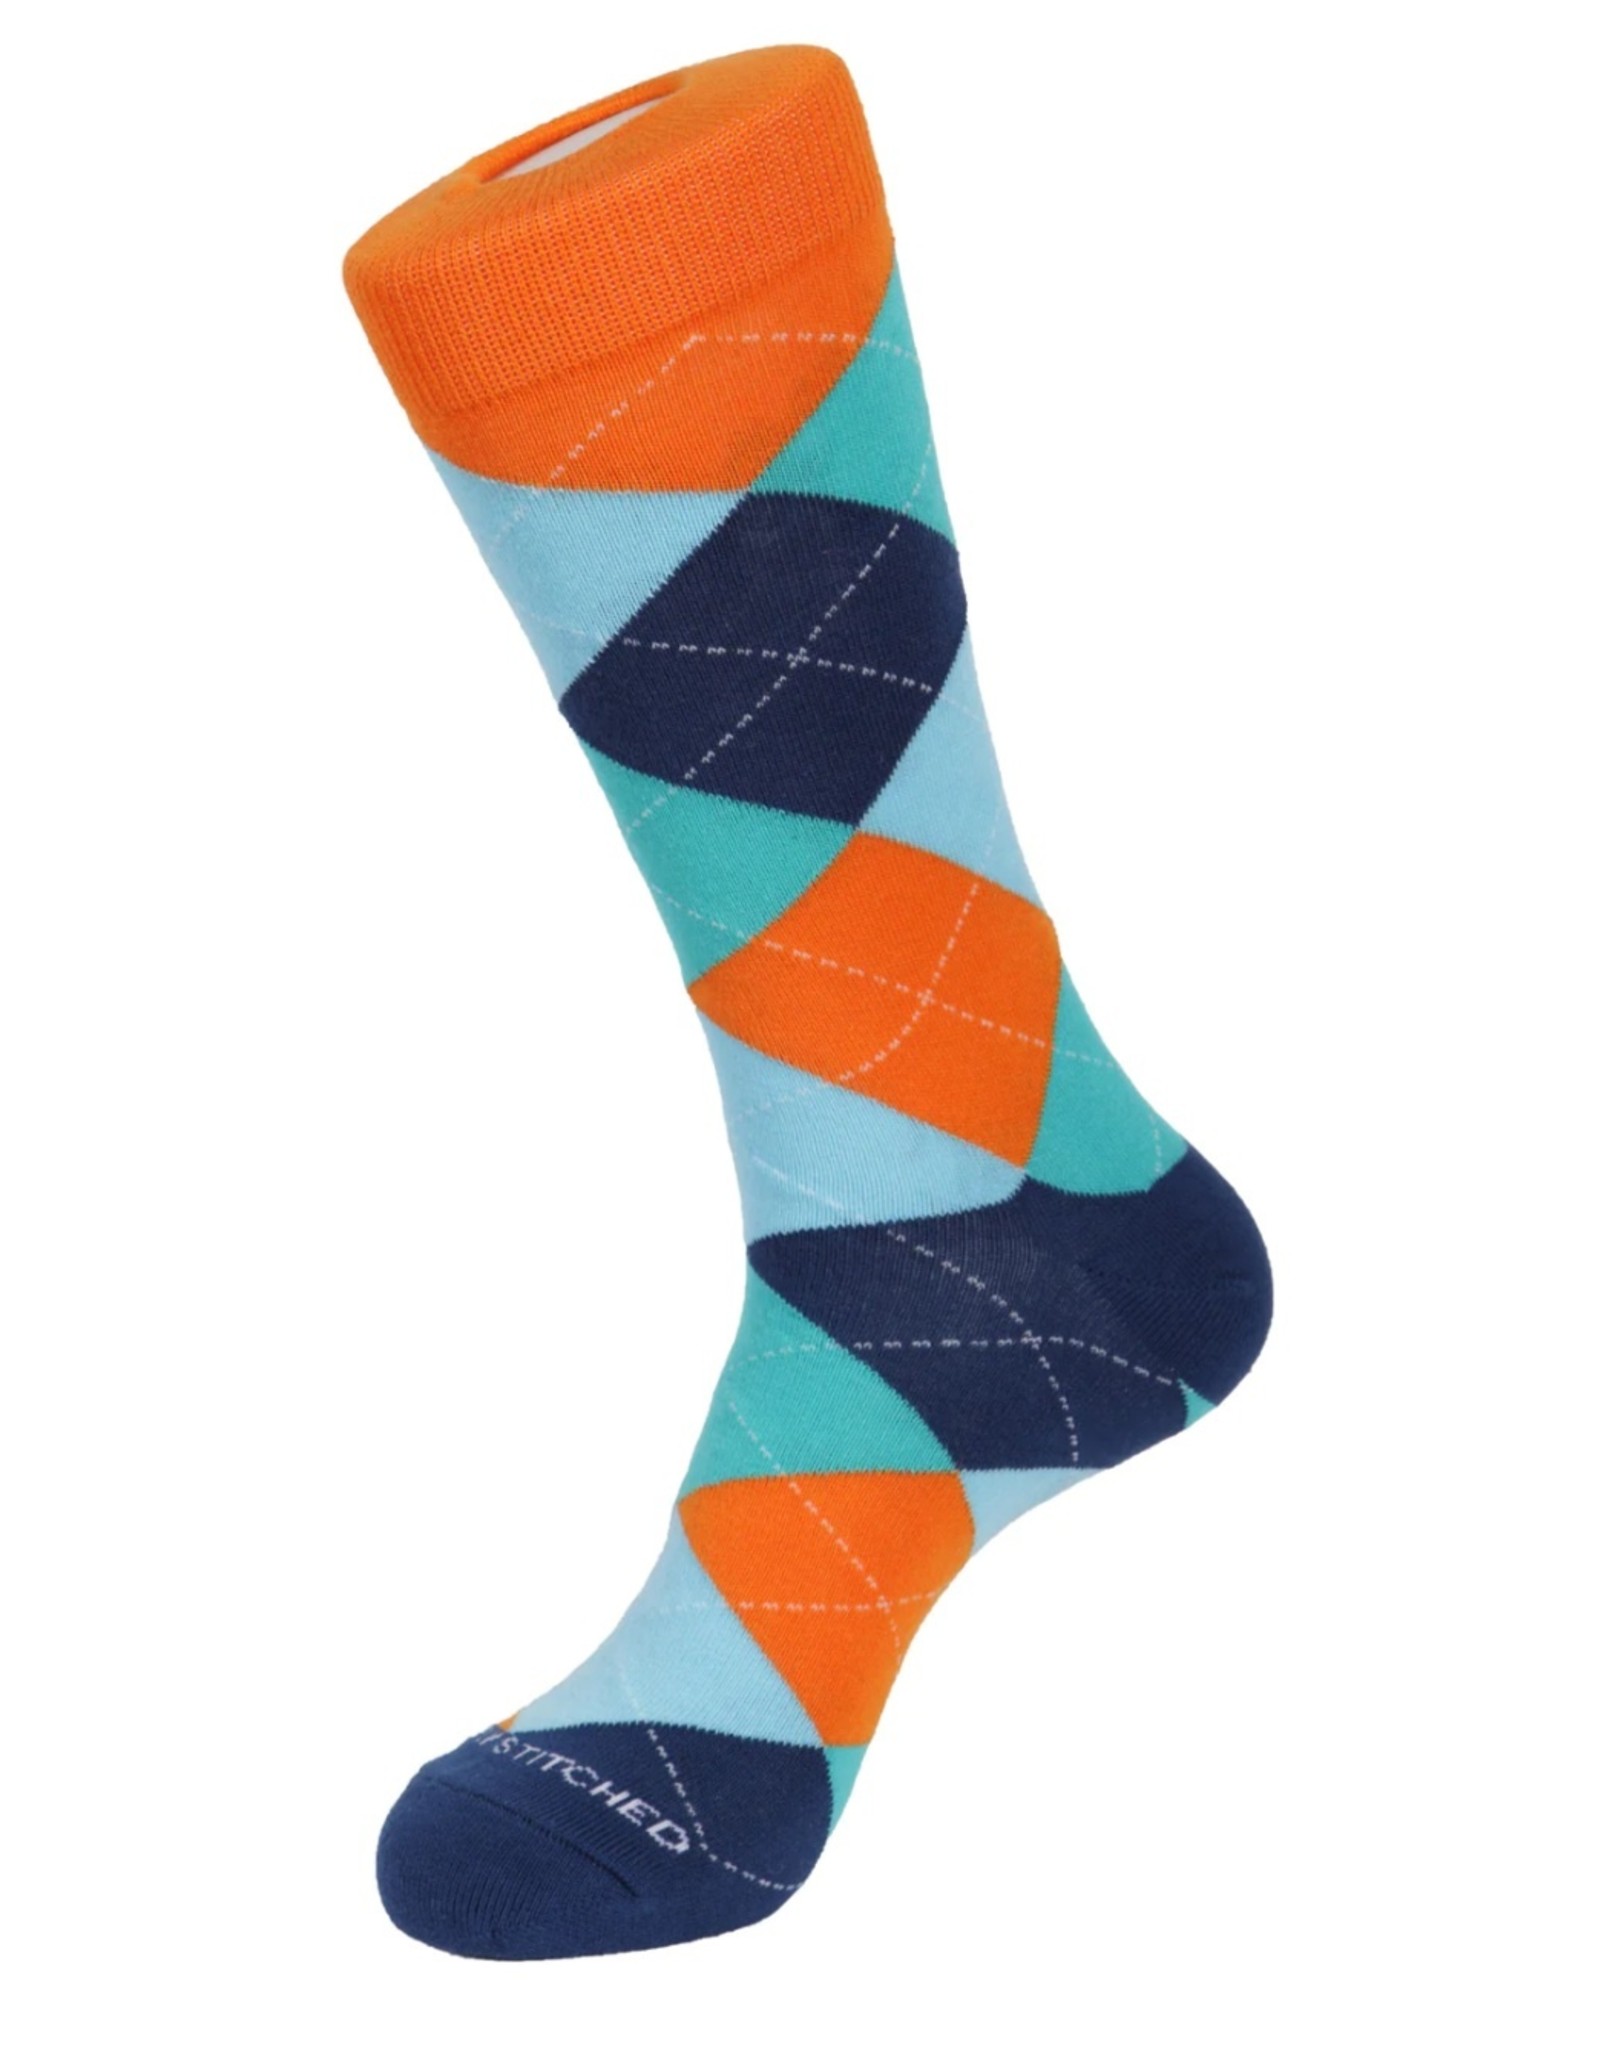 Unsimply Stitched Unsimply Stitched Men's Argyle Socks